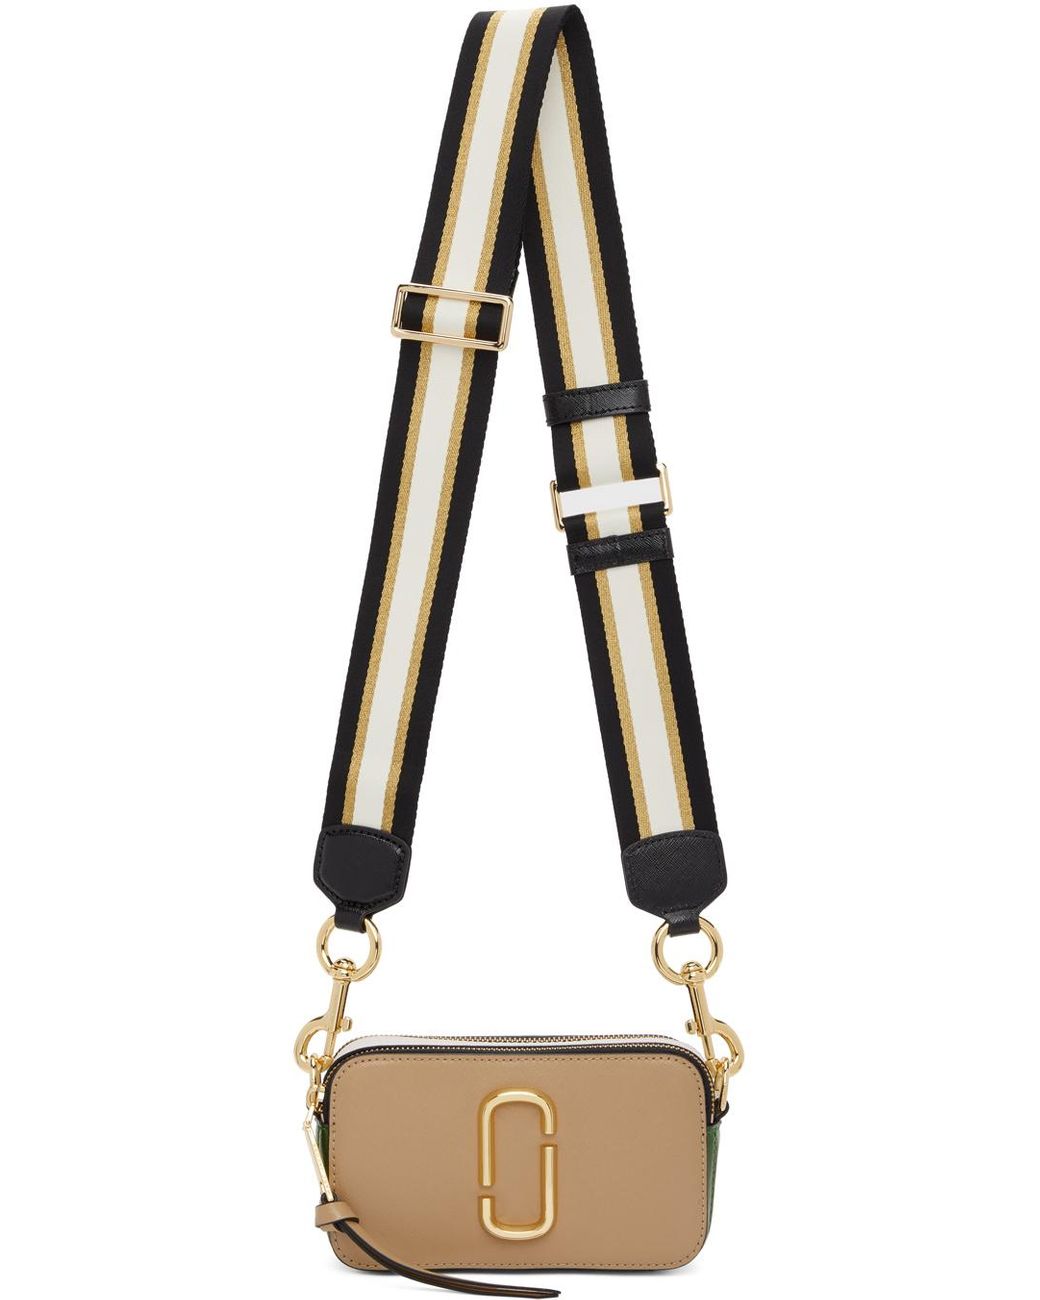 Snapshot of Marc Jacobs - Yellow, beige, taupe bag made of leather with  shoulder strap for women